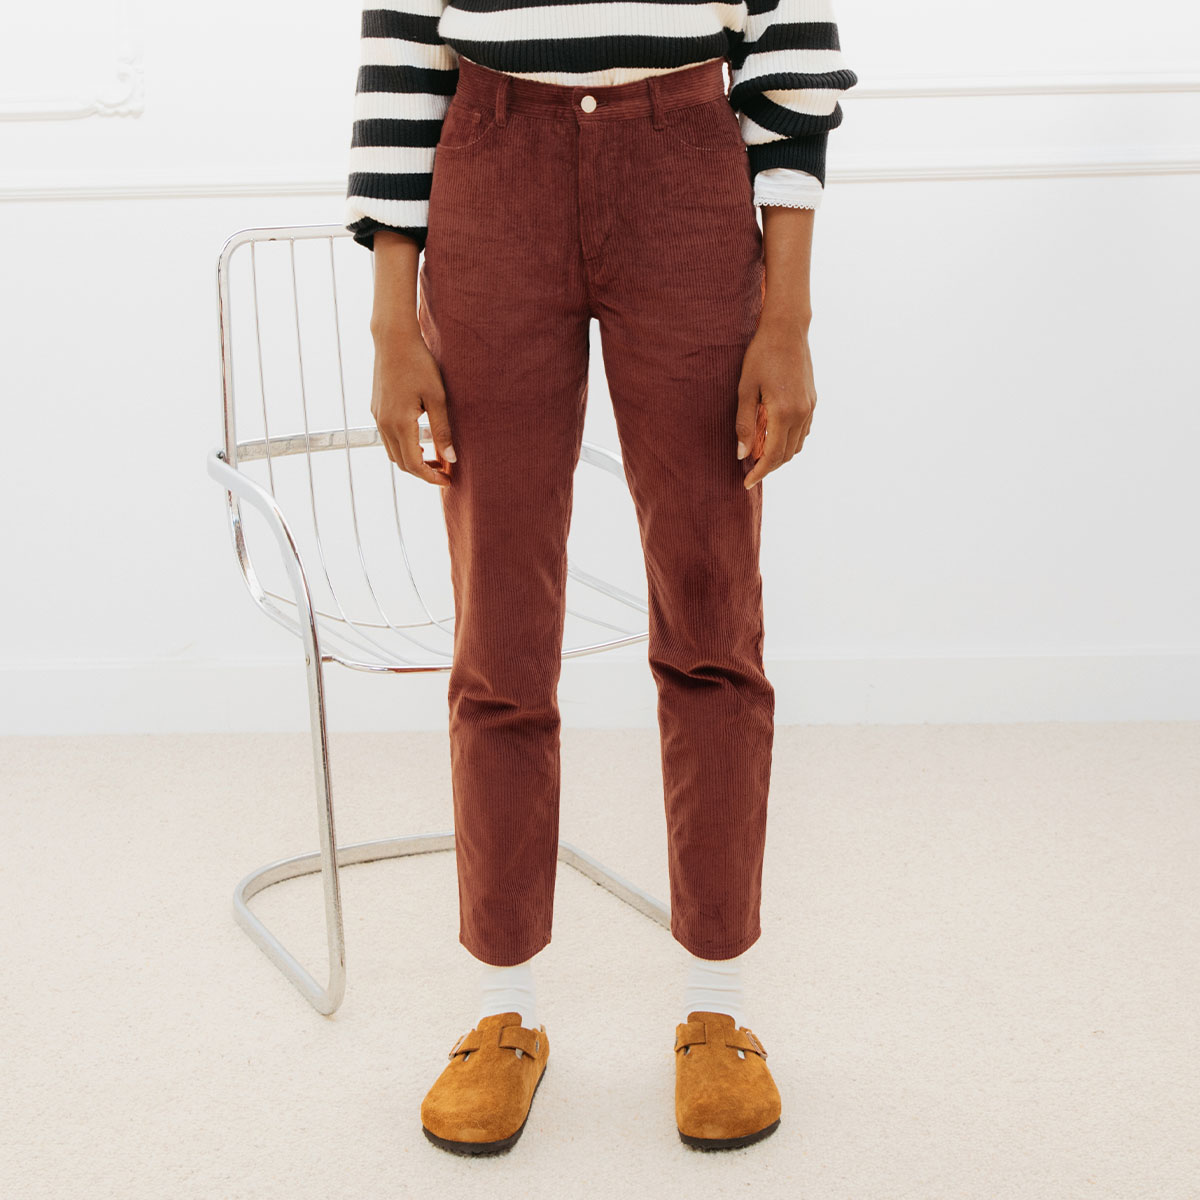 Buy ONLY Women Brown Corduroy Regular Fit Solid Cropped Trousers online   Looksgudin